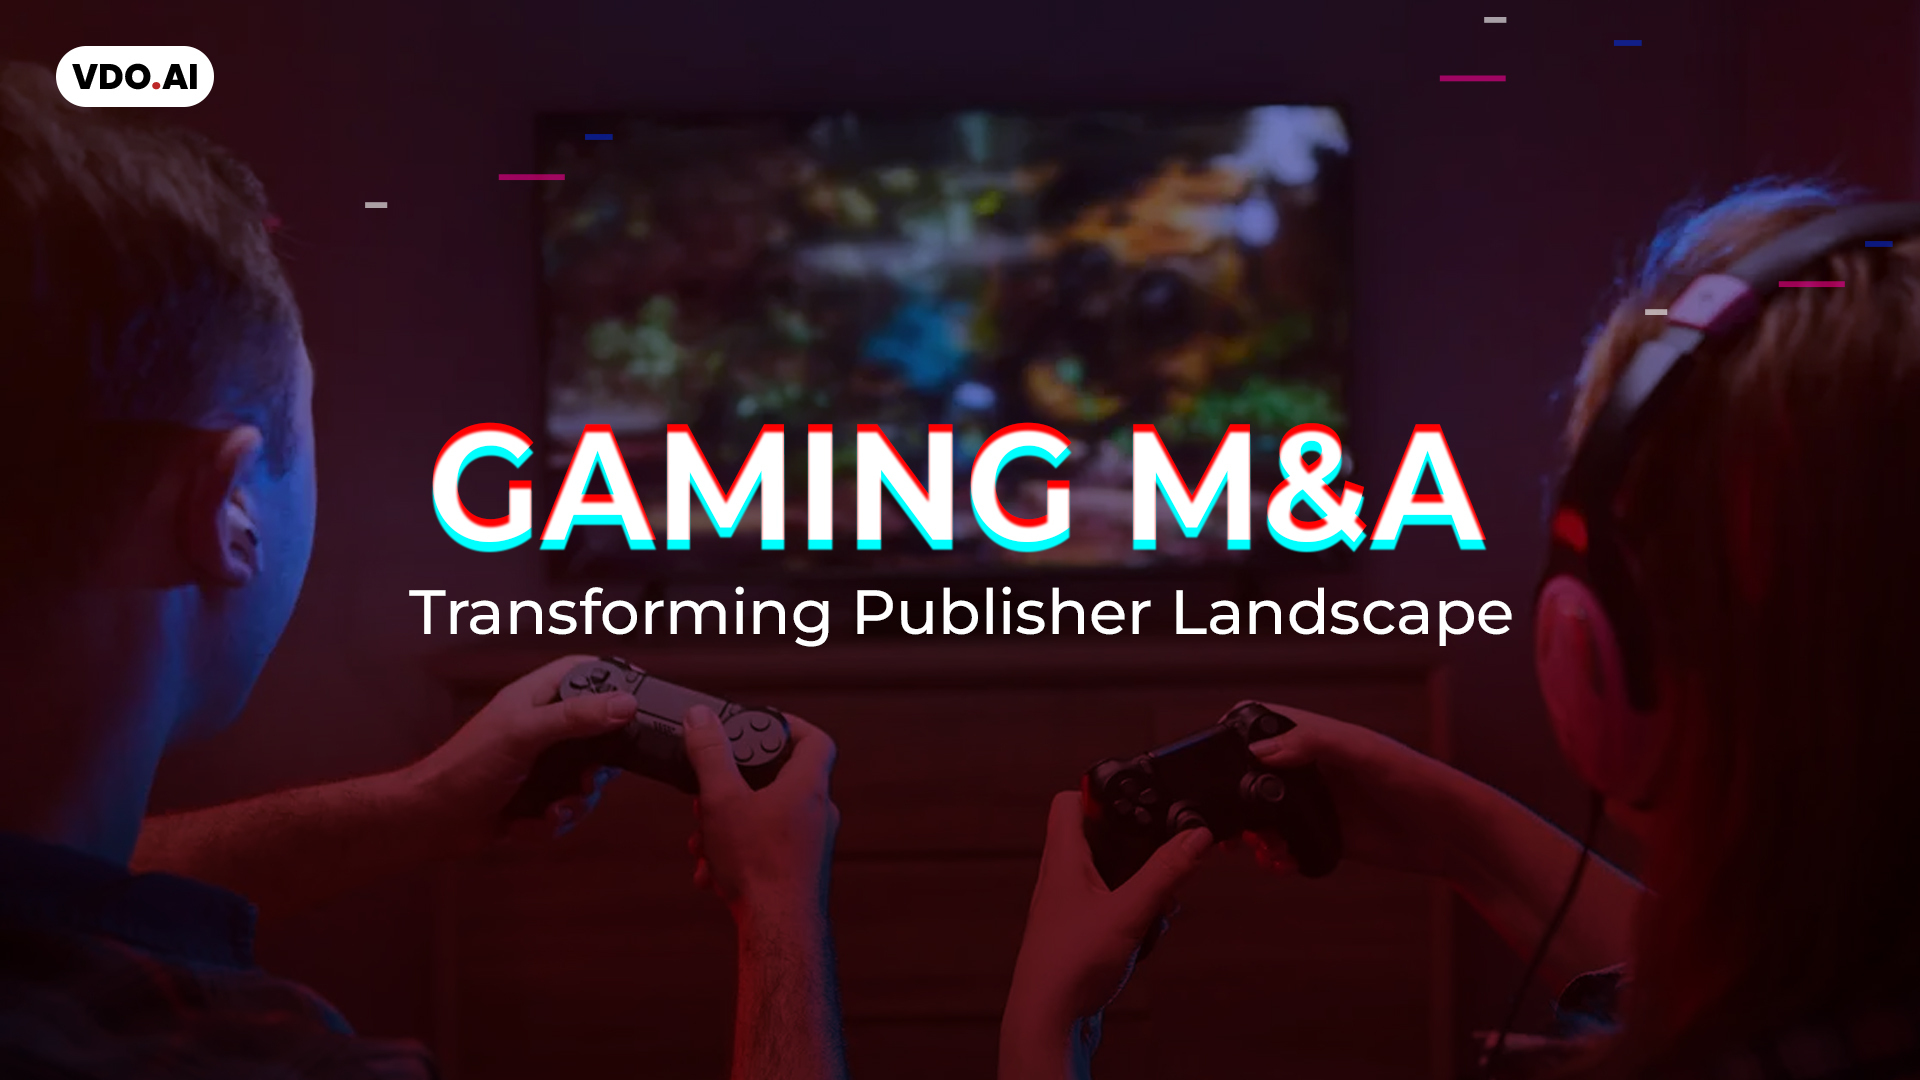 How Do Gaming Merger and Acquisition Affect Publishers? - VDO.AI